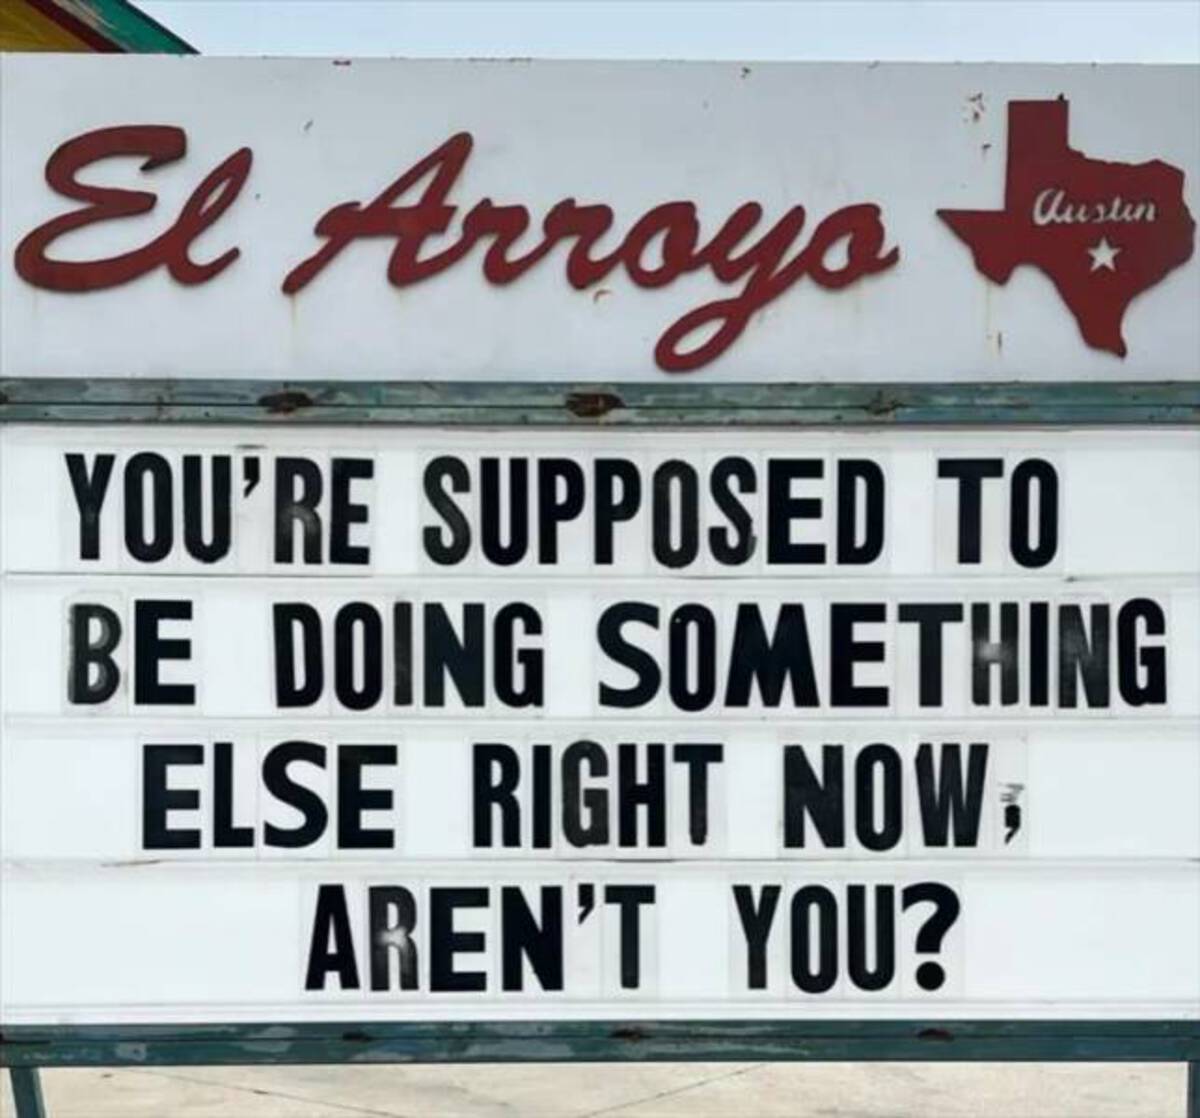 signage - El Arroyo Austin You'Re Supposed To Be Doing Something Else Right Now, Aren'T You?